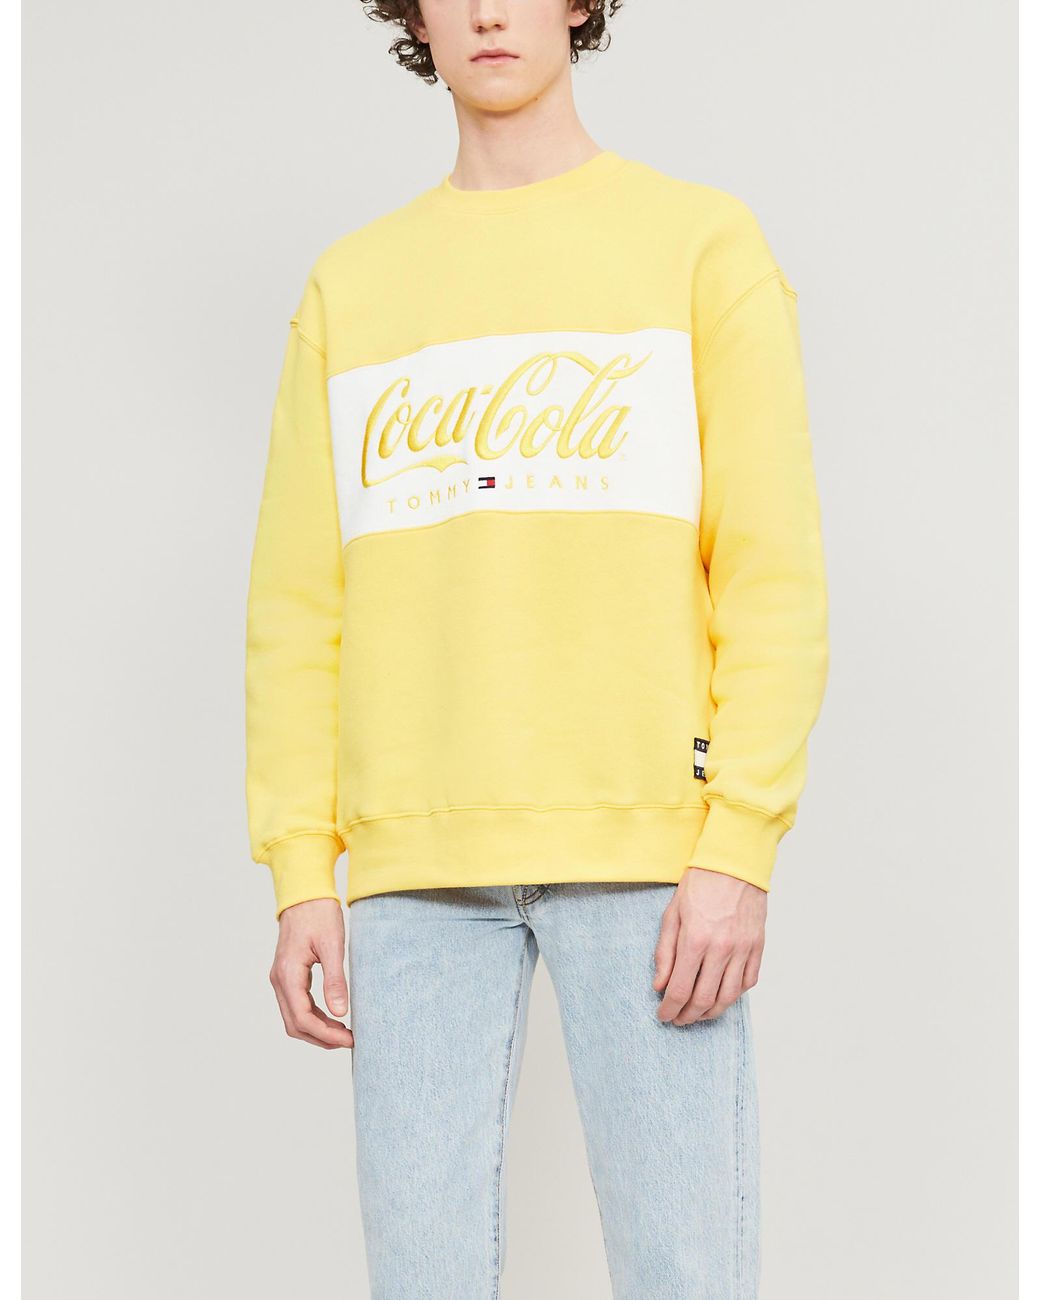 Tommy Hilfiger X Coca Cola Logo-print Cotton-blend Sweatshirt in Yellow for | Lyst Canada